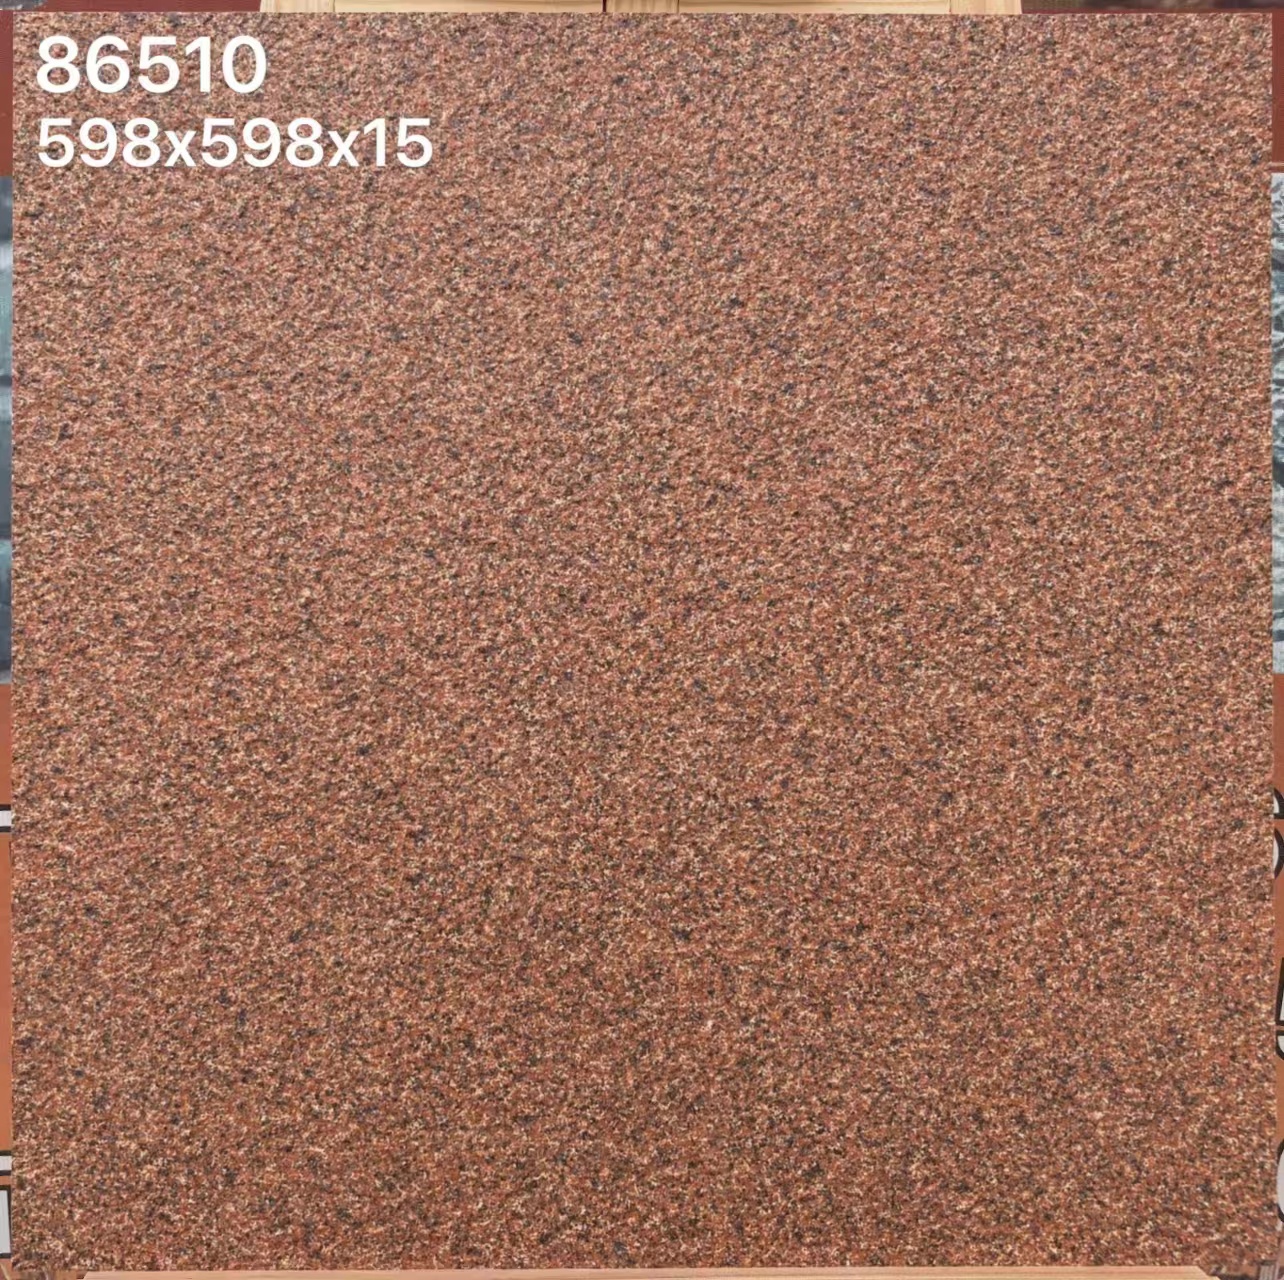 Discount Ceramic Tiles - Imperial Red Style by TileEssence